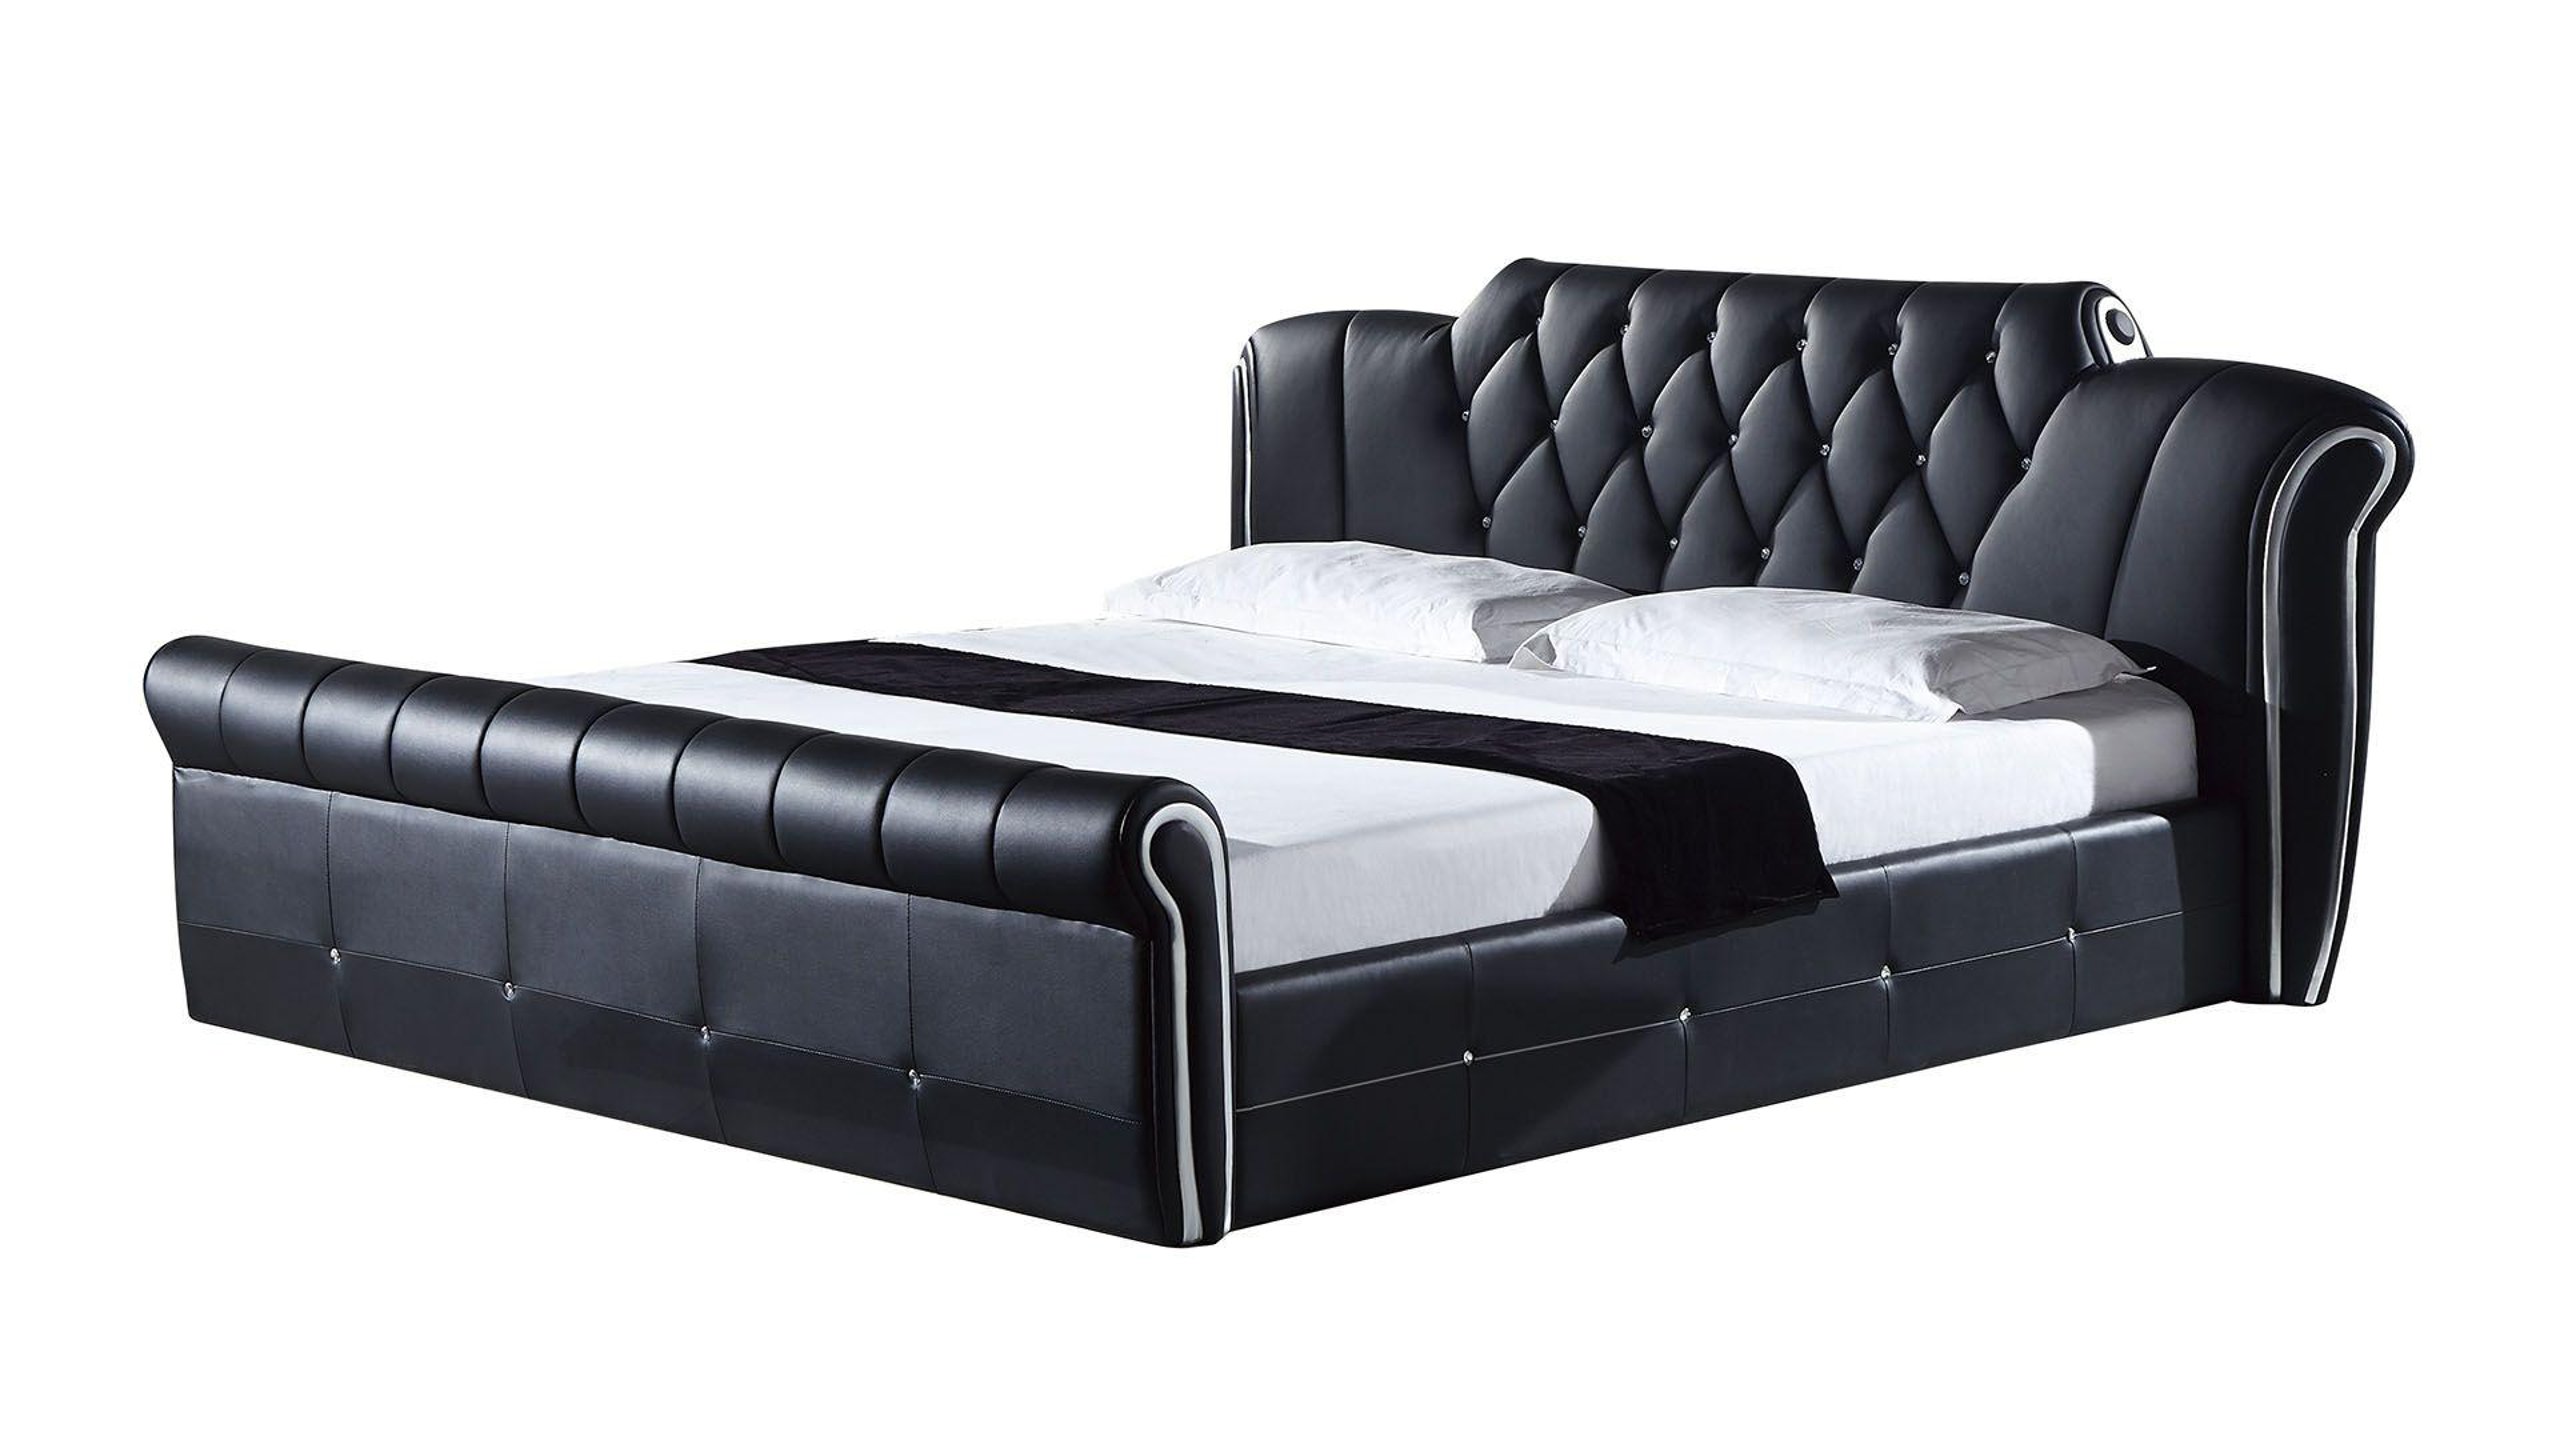 King Size Bed Available @ Best Price Online